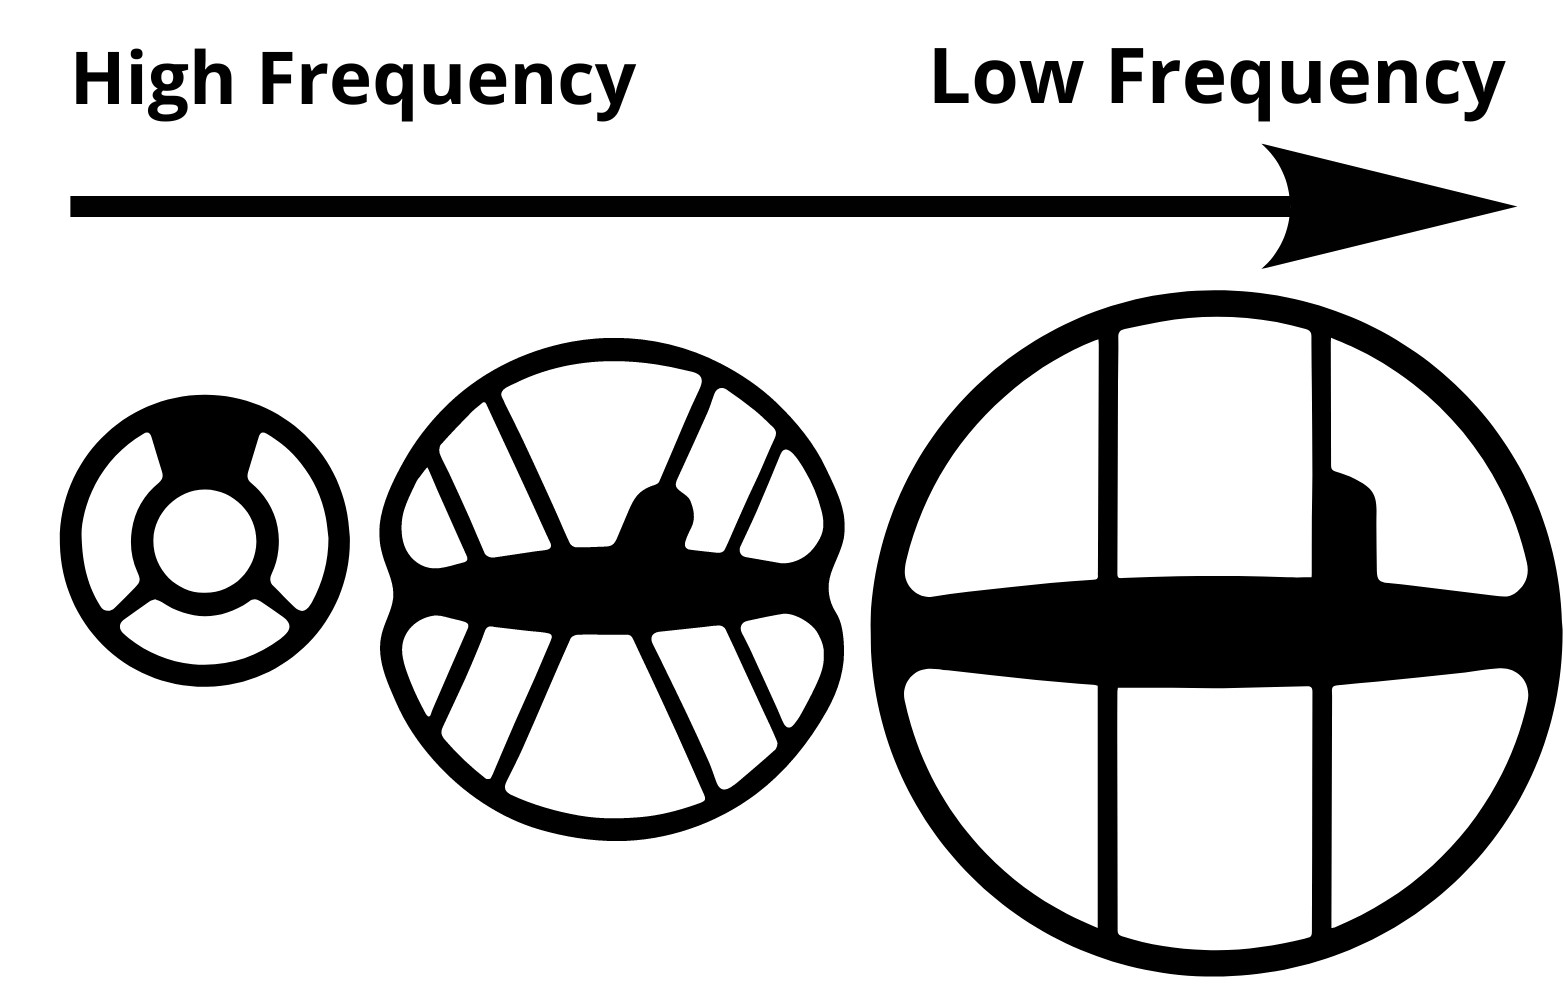 Does the type of search coil affect frequency?